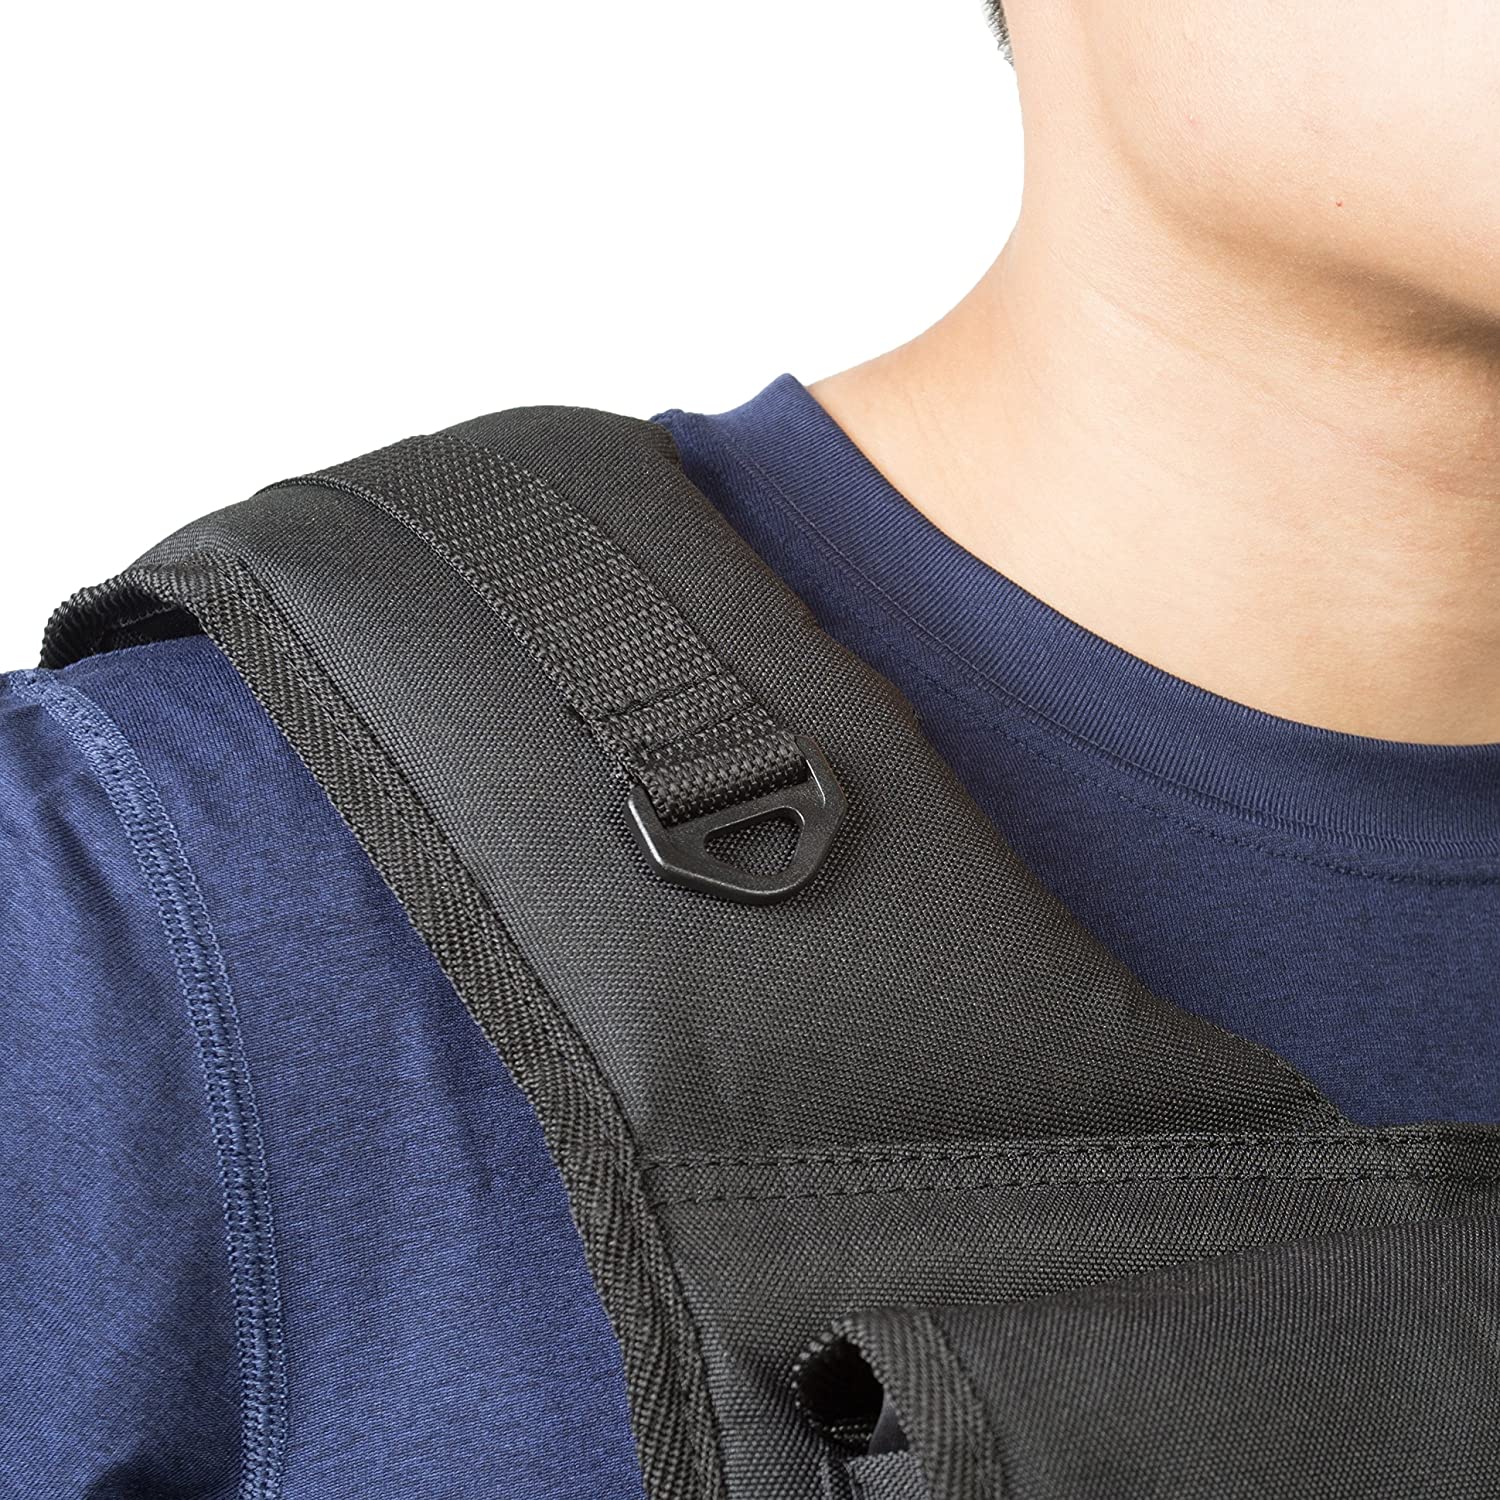 cap barbell adjustable weighted vest, 40 lb - image 5 of 5